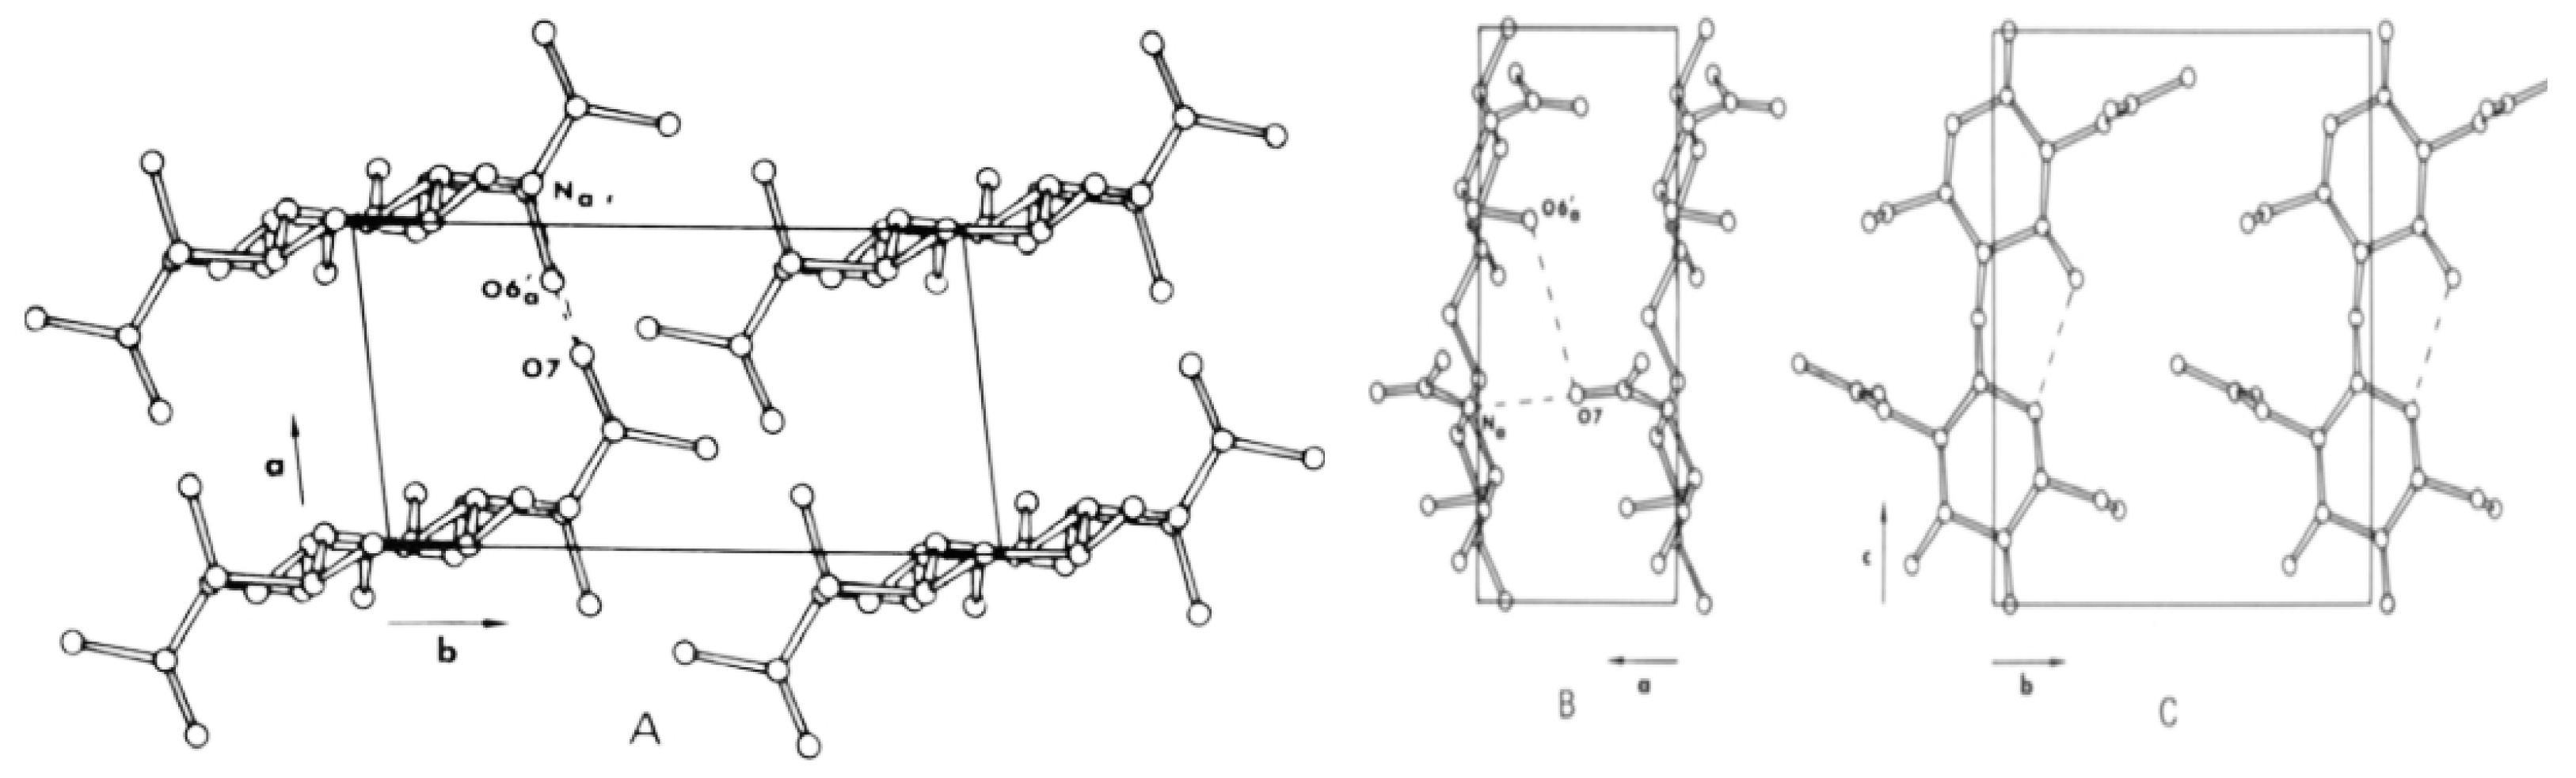 Molecules Free Full Text Chemical Proprieties Of Biopolymers